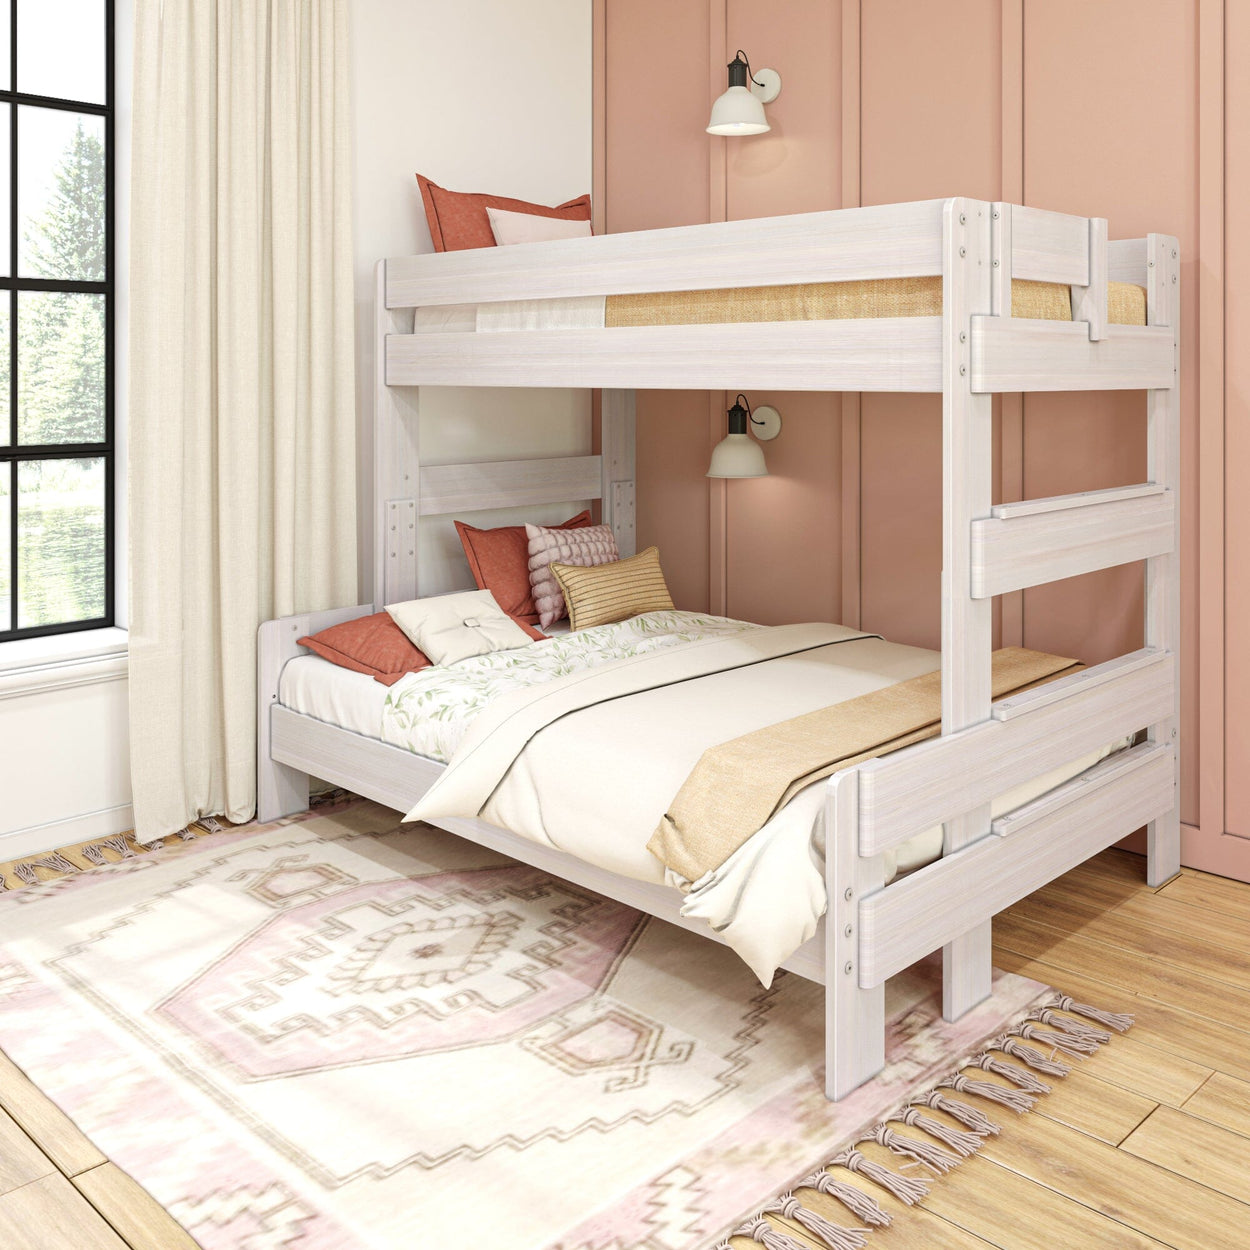 195231-182 : Bunk Beds Farmhouse Twin over Full Bunk Bed, White Wash